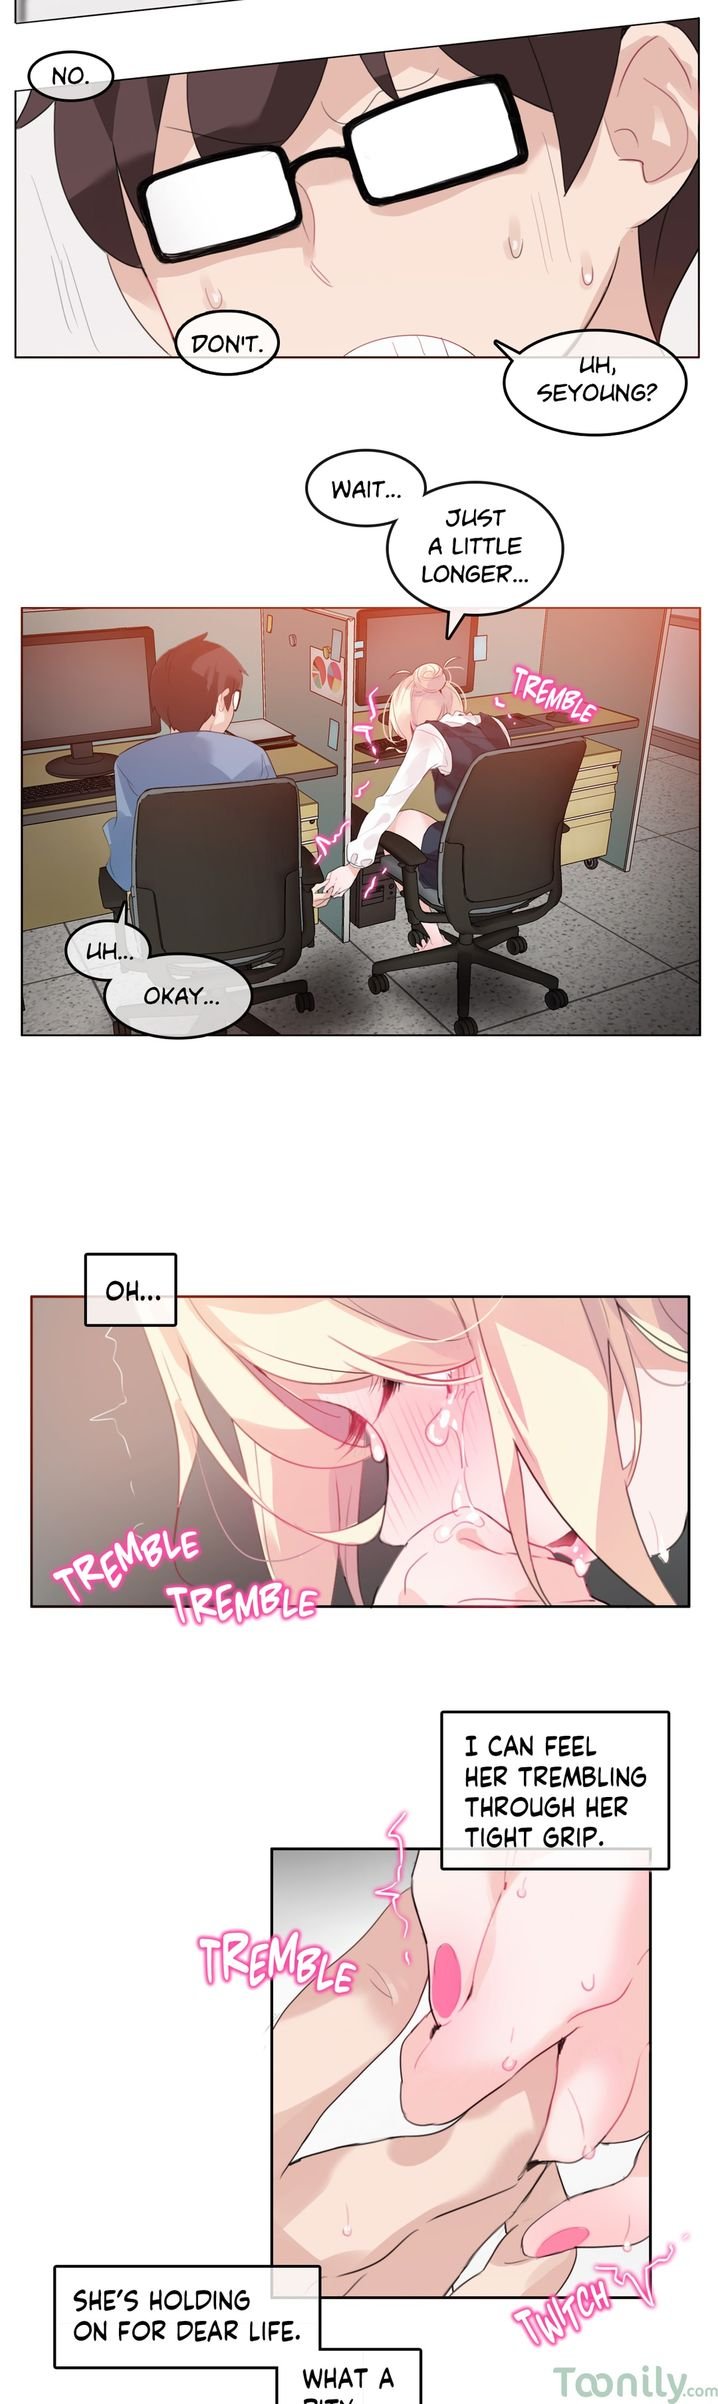 a-perverts-daily-life-chap-23-19